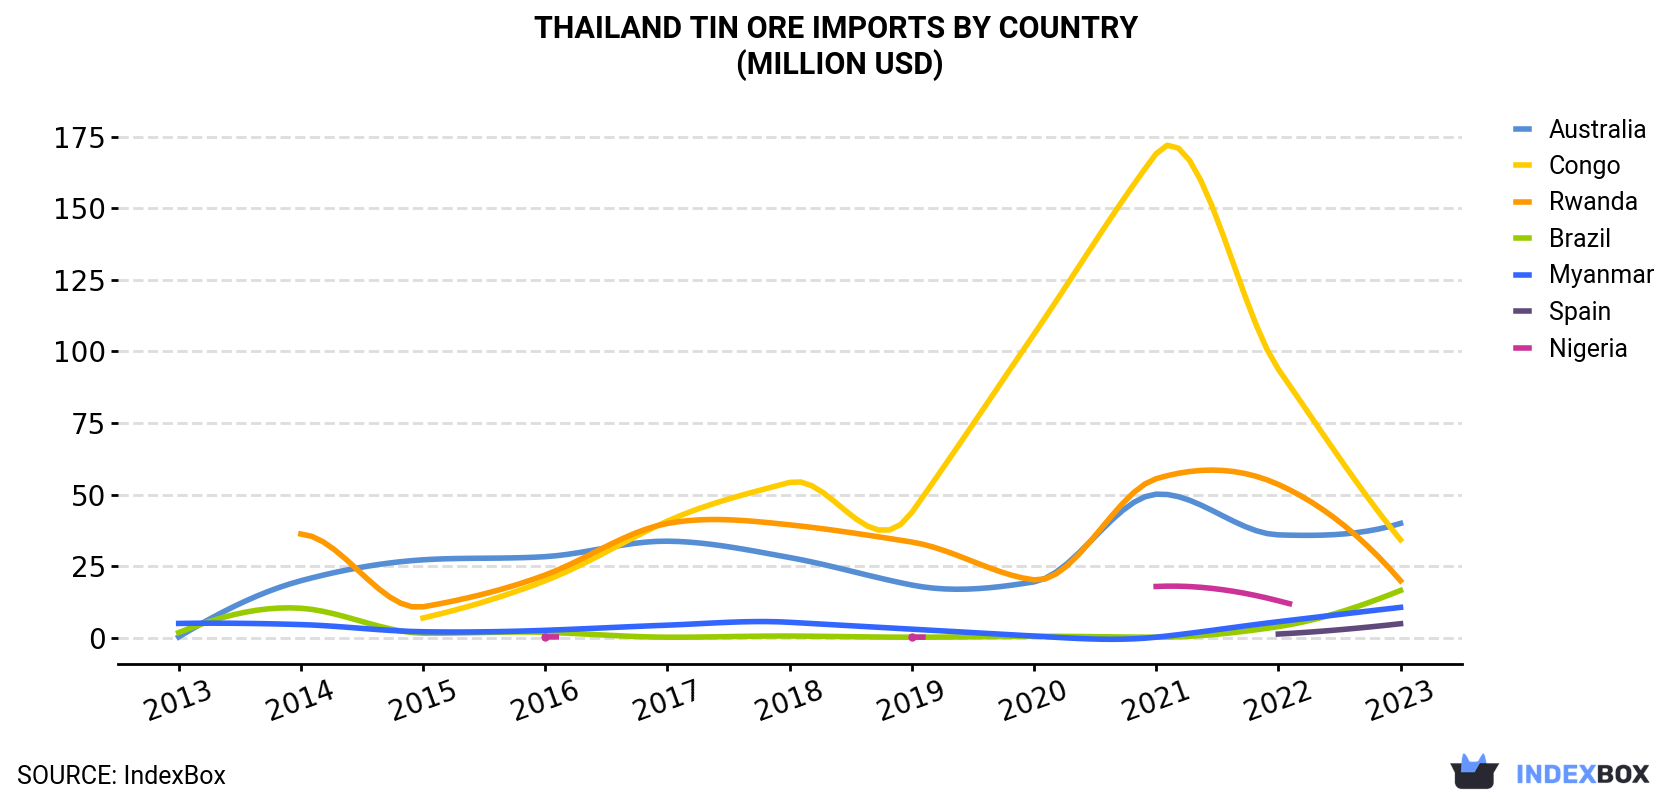 Thailand Tin Ore Imports By Country (Million USD)